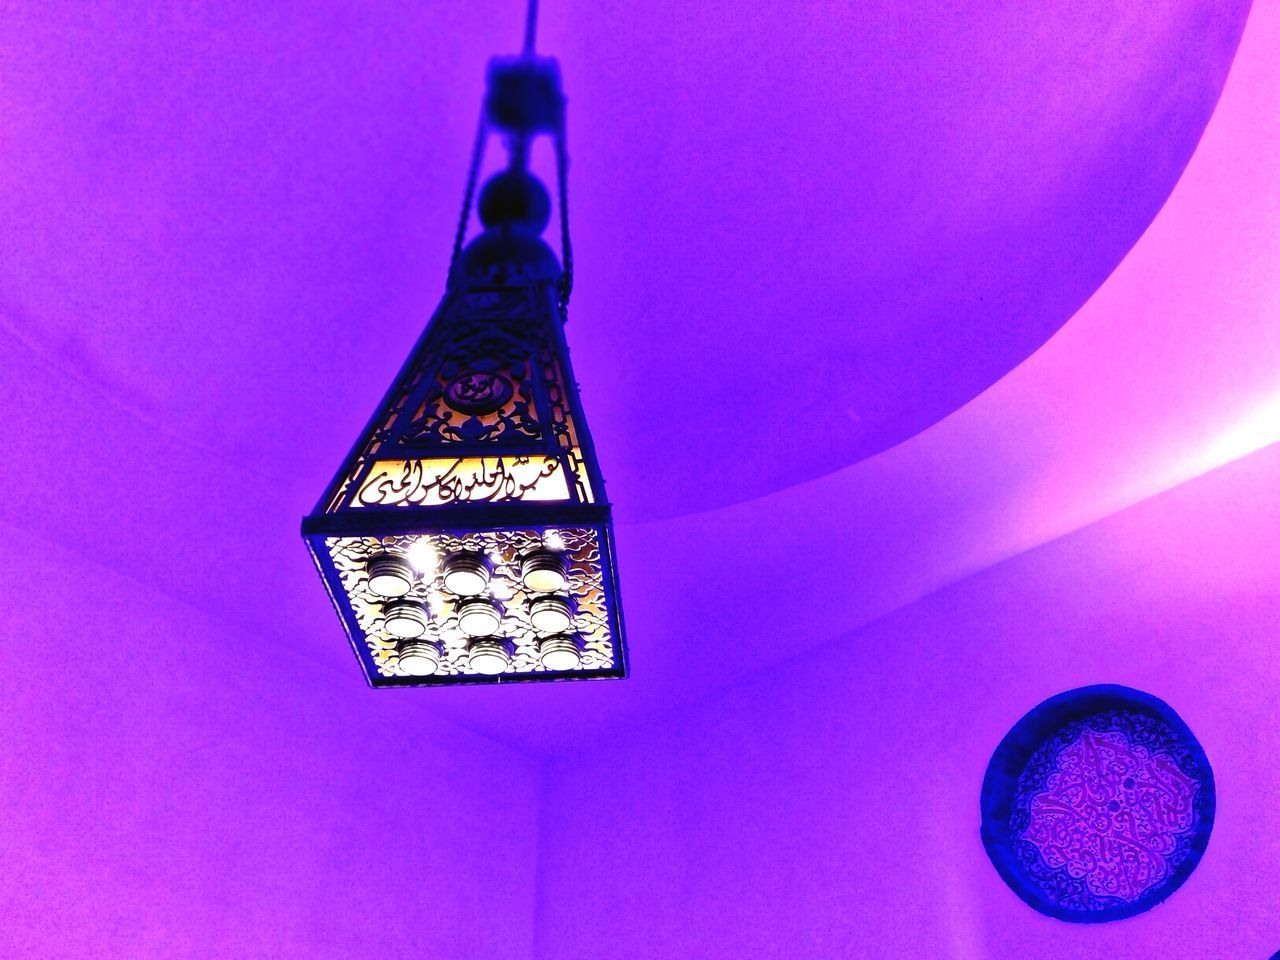 LOW ANGLE VIEW OF ILLUMINATED ELECTRIC LAMP